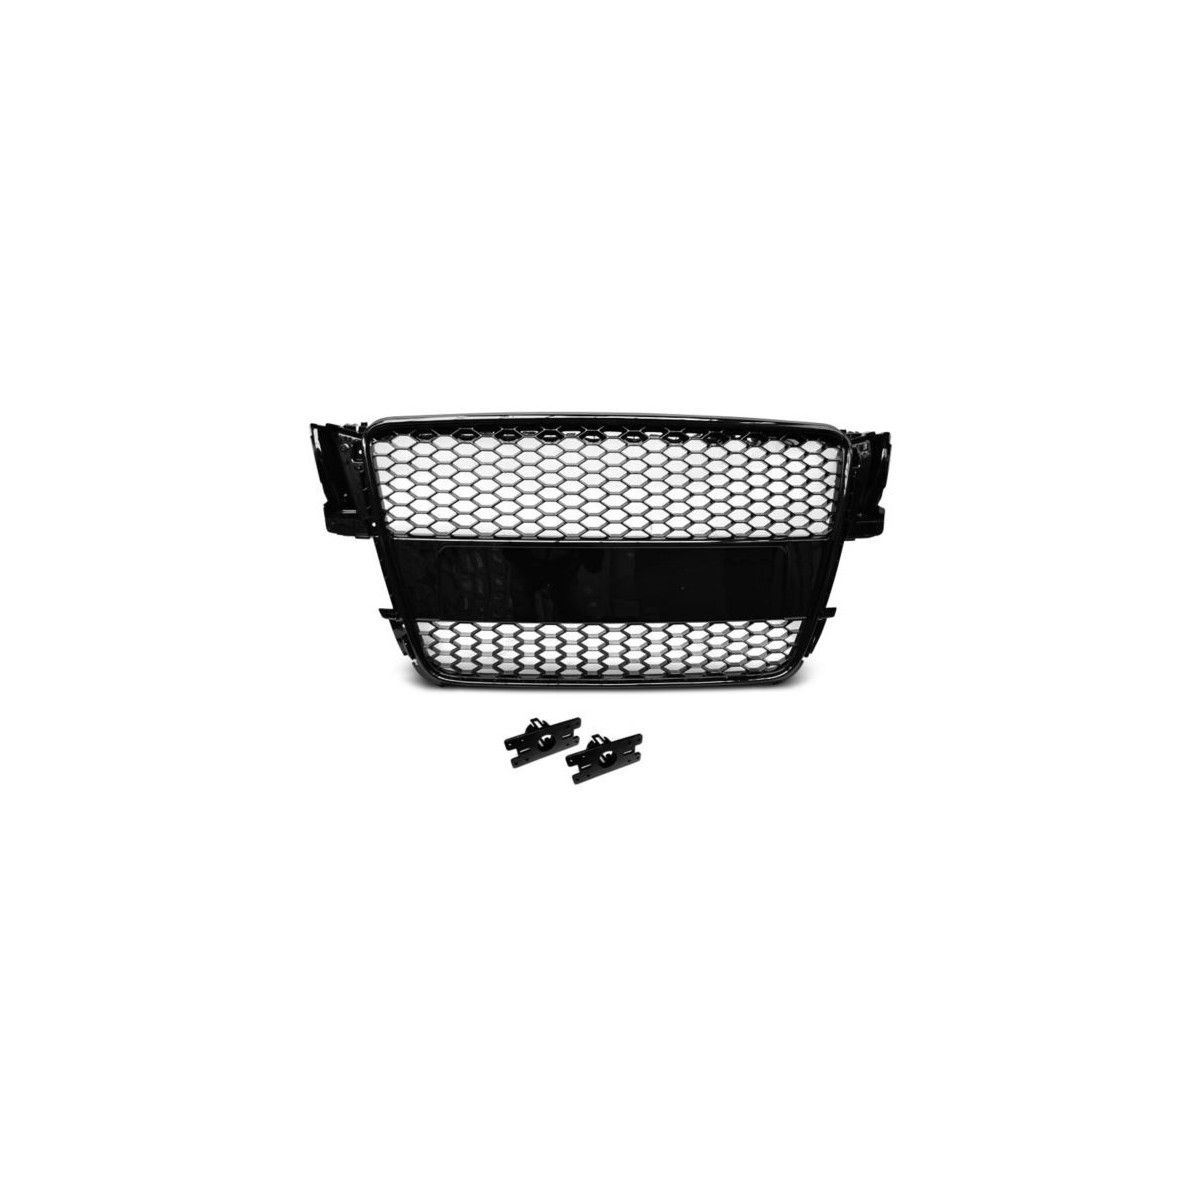 GRILL AUDI A5 07-06.11 GLOSSY BLACK RS-STYLE